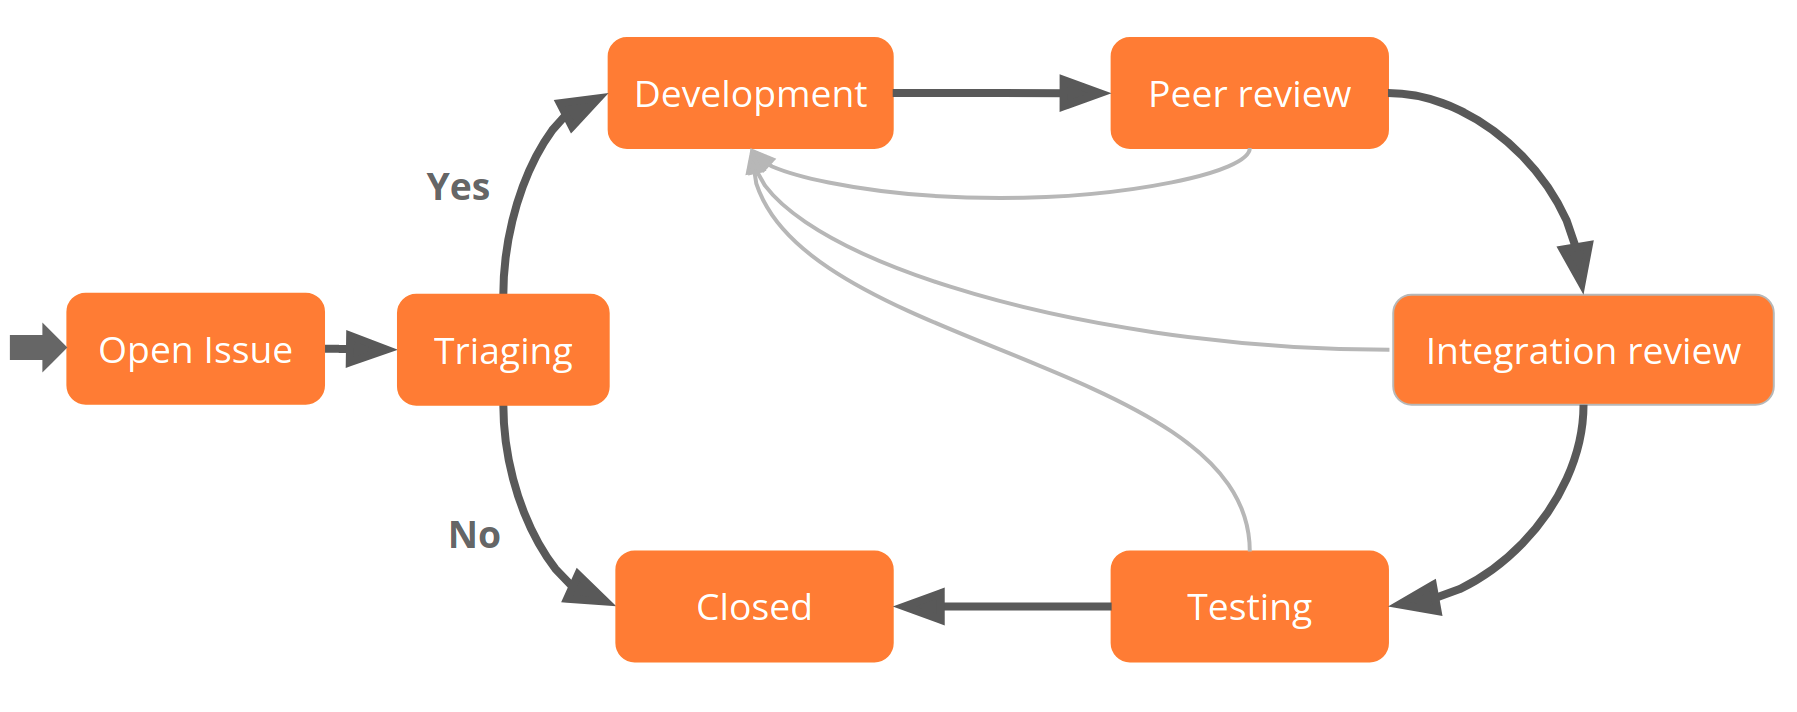 A summary of the Moodle Development Process flow